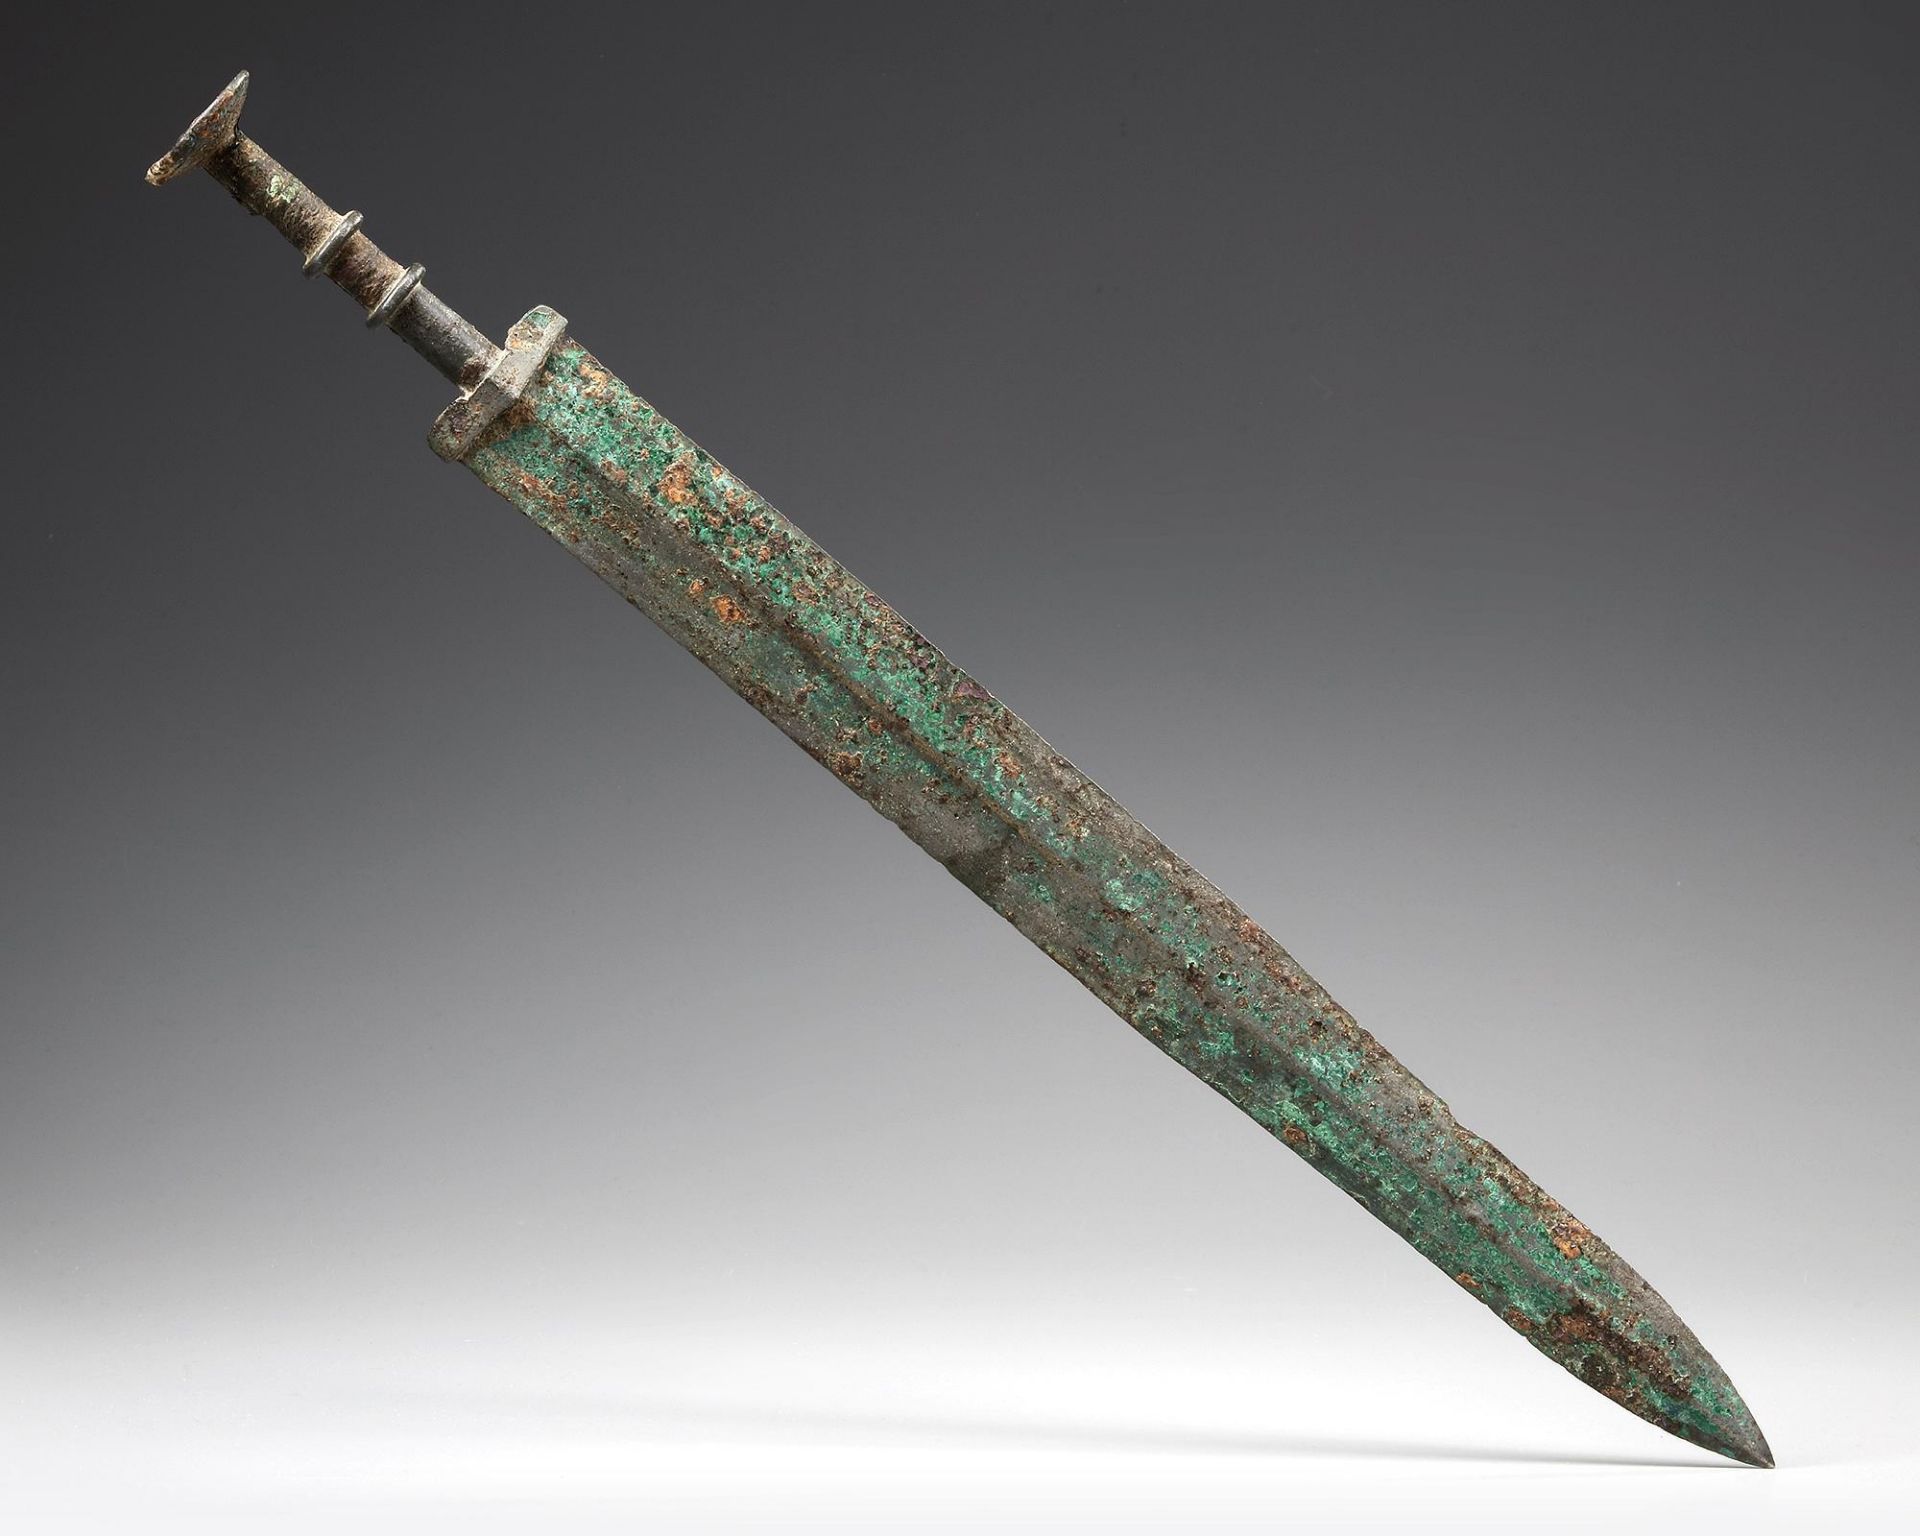 A CHINESE BRONZE SWORD, WESTERN HAN DYNASTY (206 BC-24 AD)